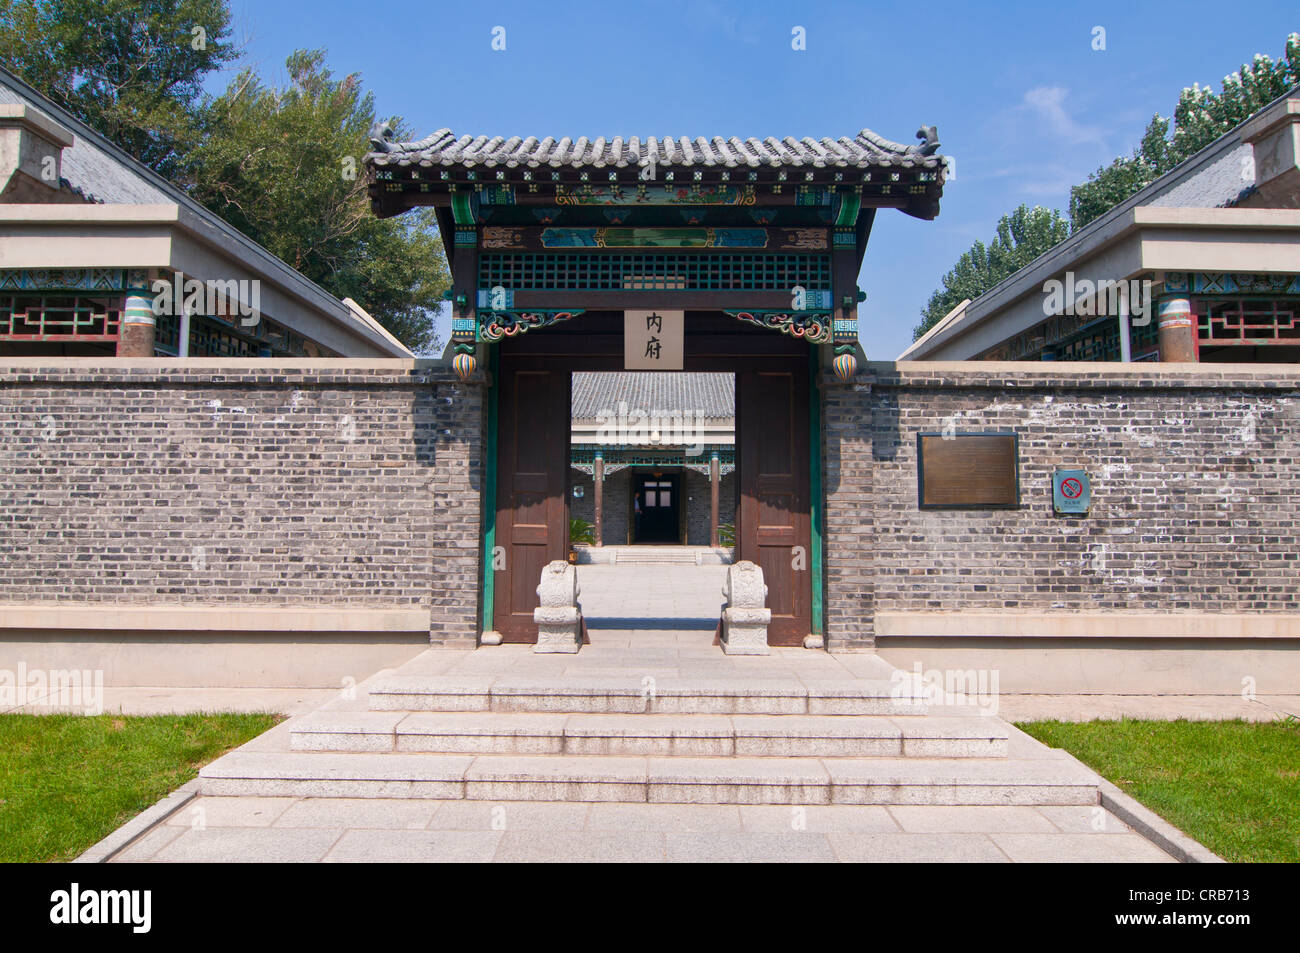 Palace of Emperor Puyi, Museum of the Imperial Palace of the Manchu State, Changchun, Jilin, China Stock Photo